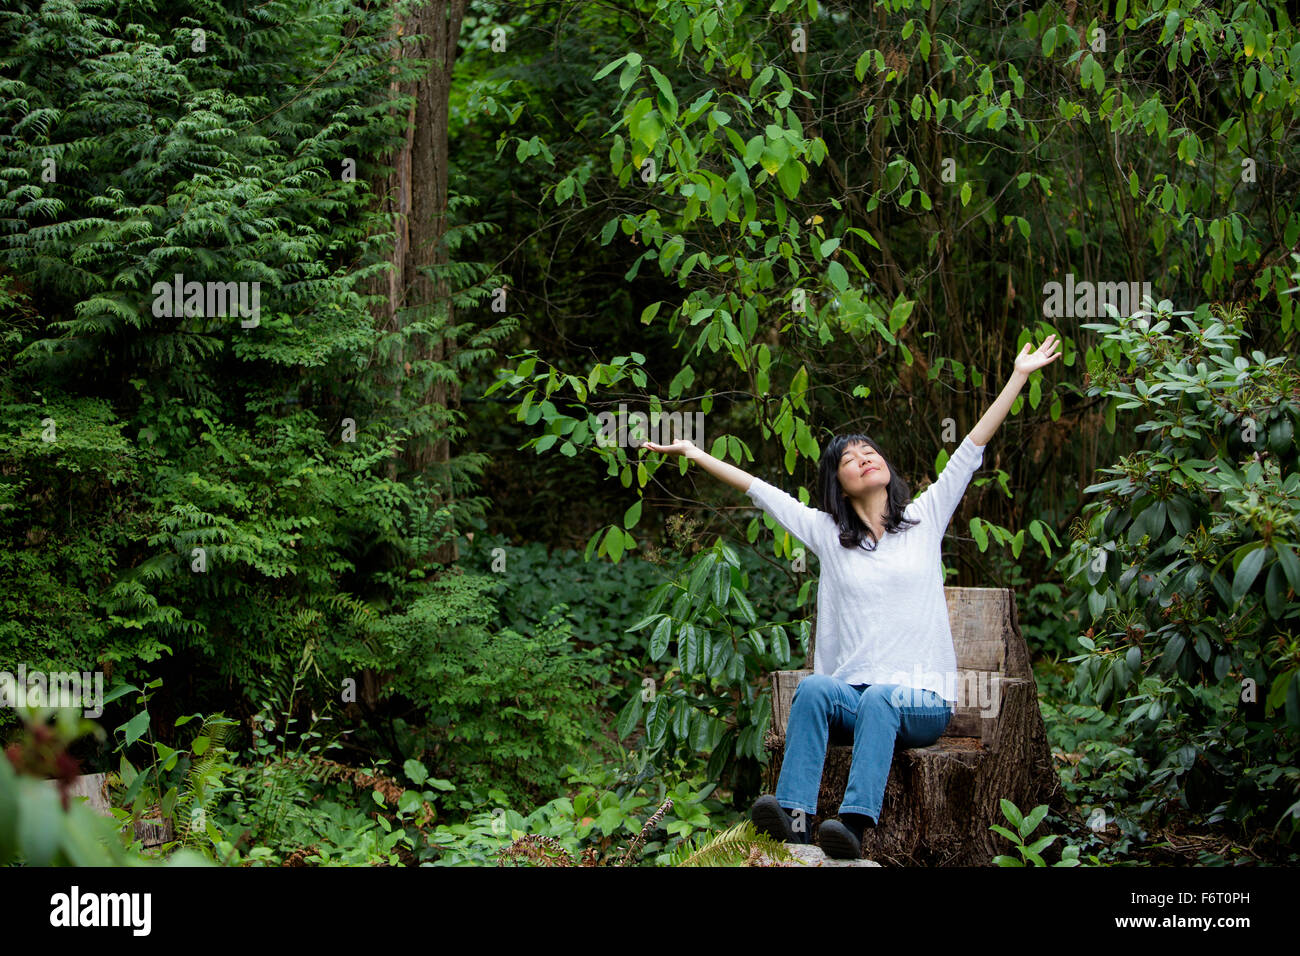 Japanese woman cheering in garden Banque D'Images